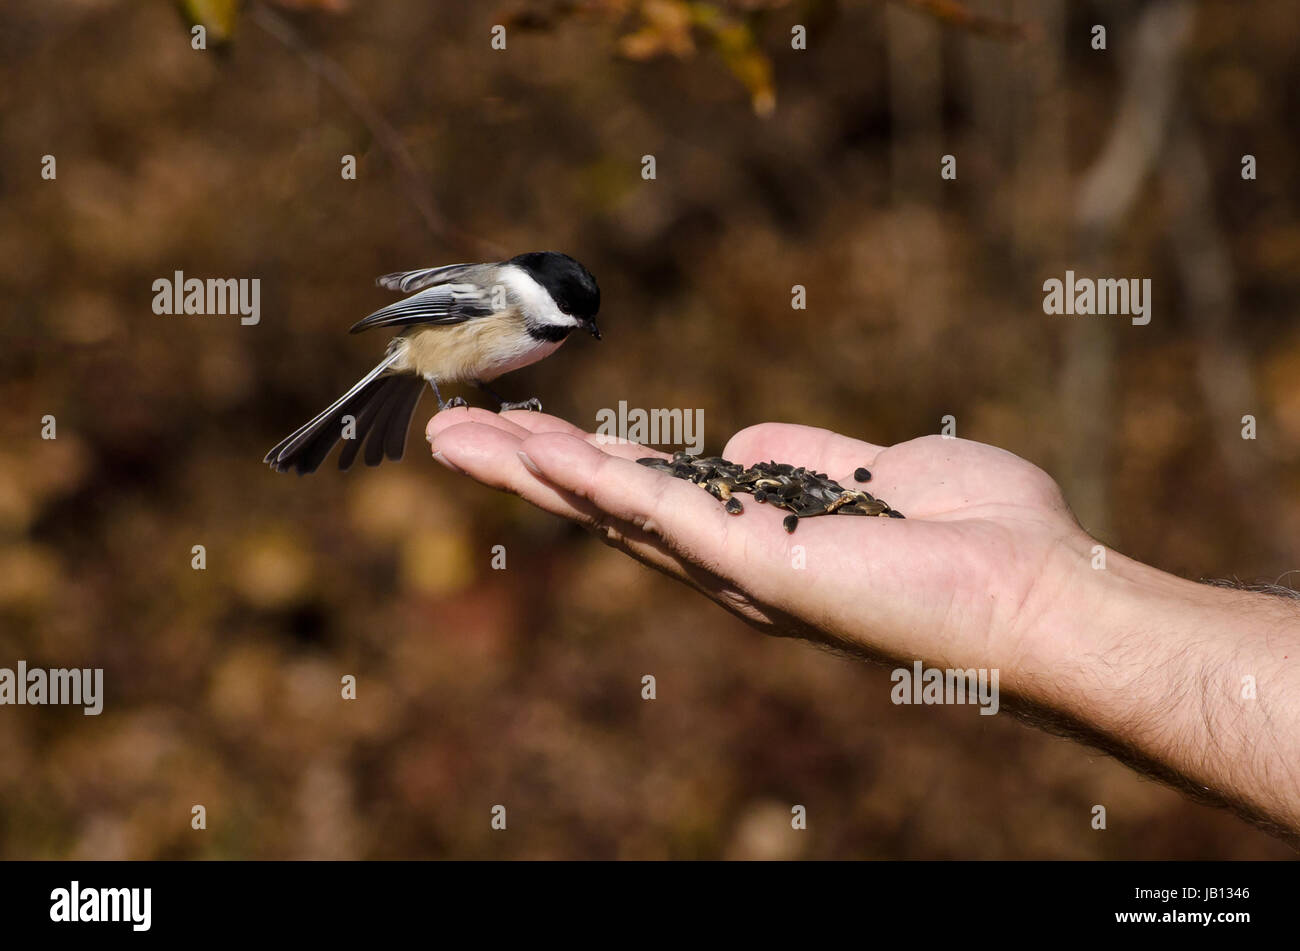 Black-Capped Chickadee Eating From a Hand Stock Photo